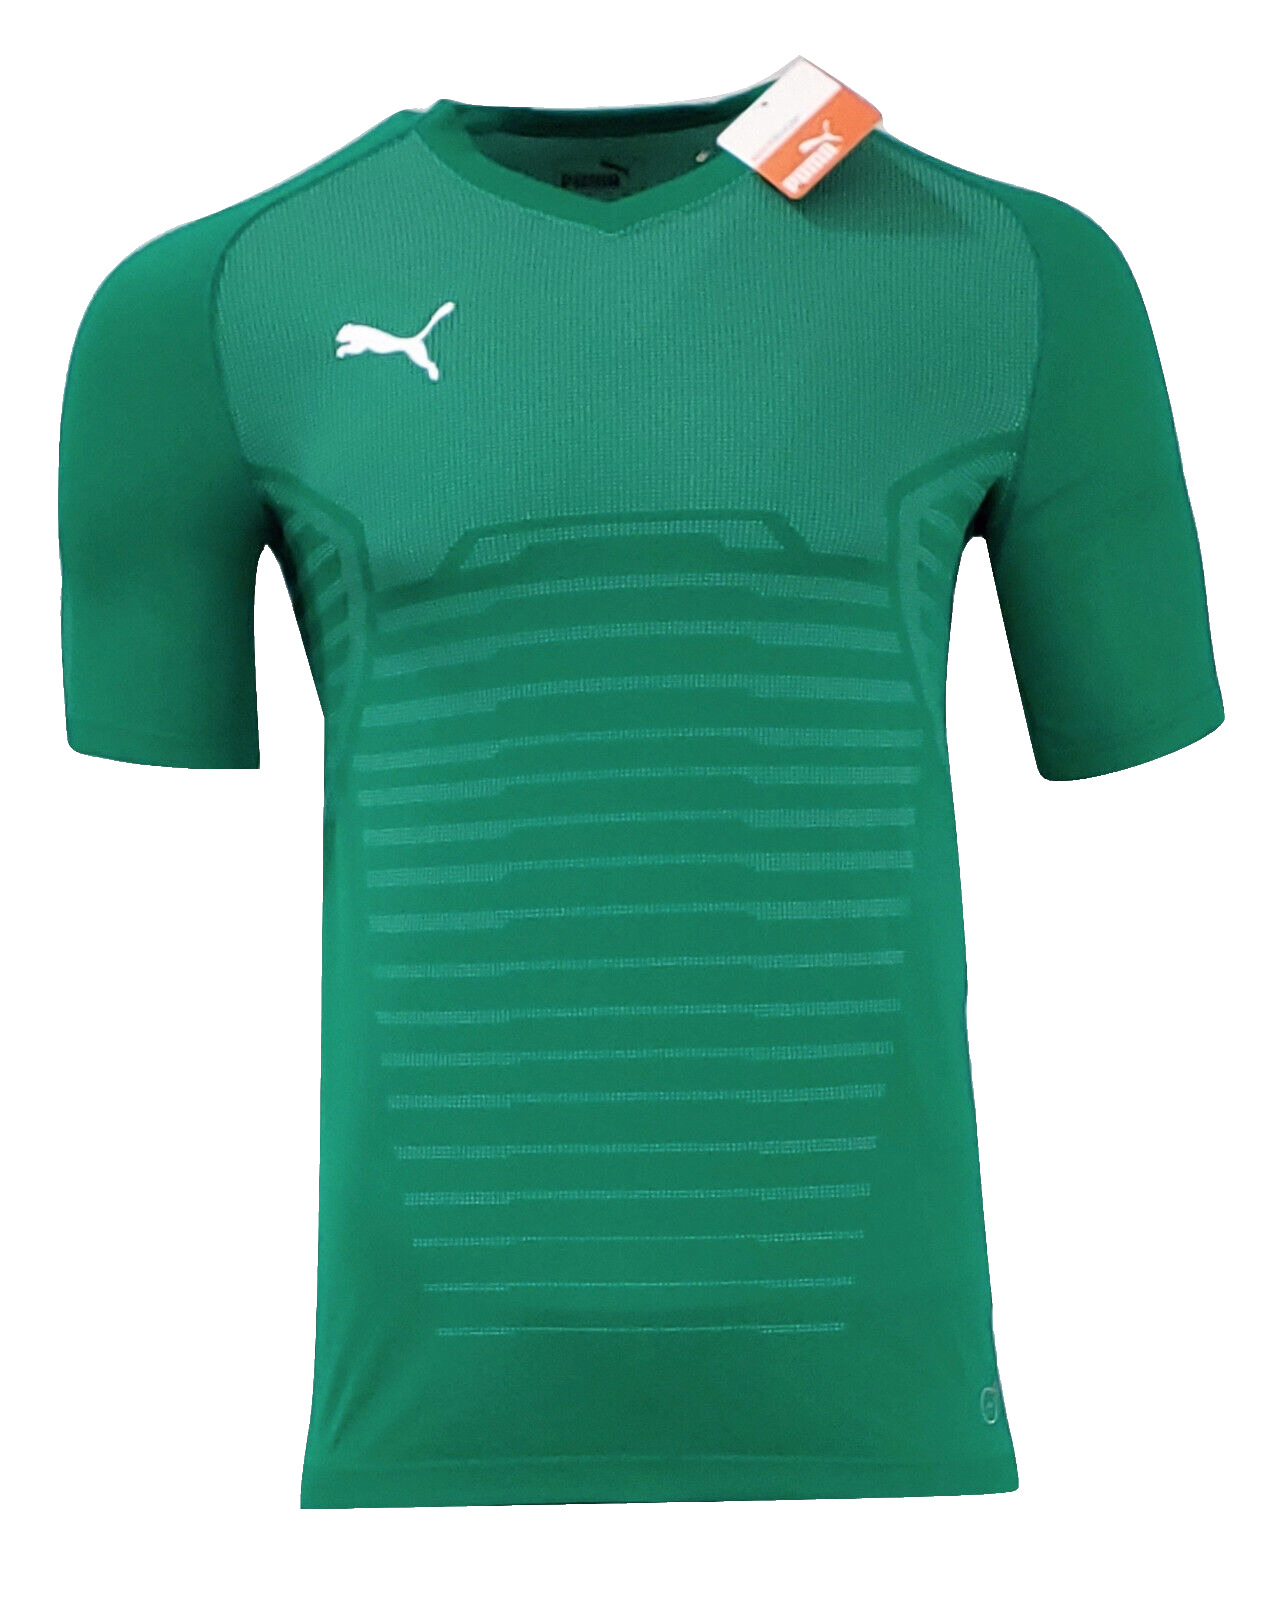 Puma Men's Dry Cell Performance Gym Sport Lifestyle Activewear T-Shirt Green - L